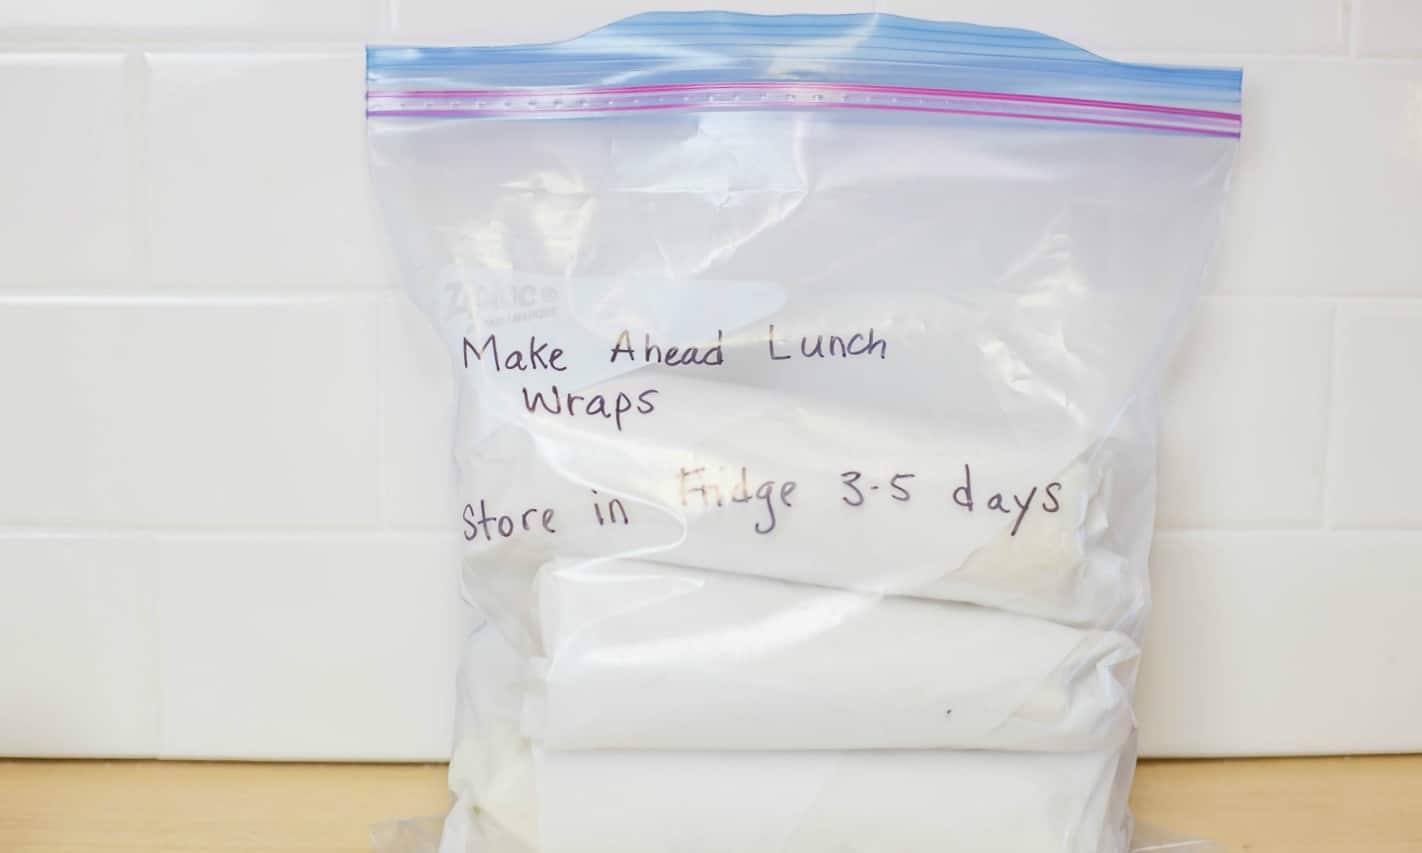 Add the wraps to a freezer bag and label along with the date and instructions. 